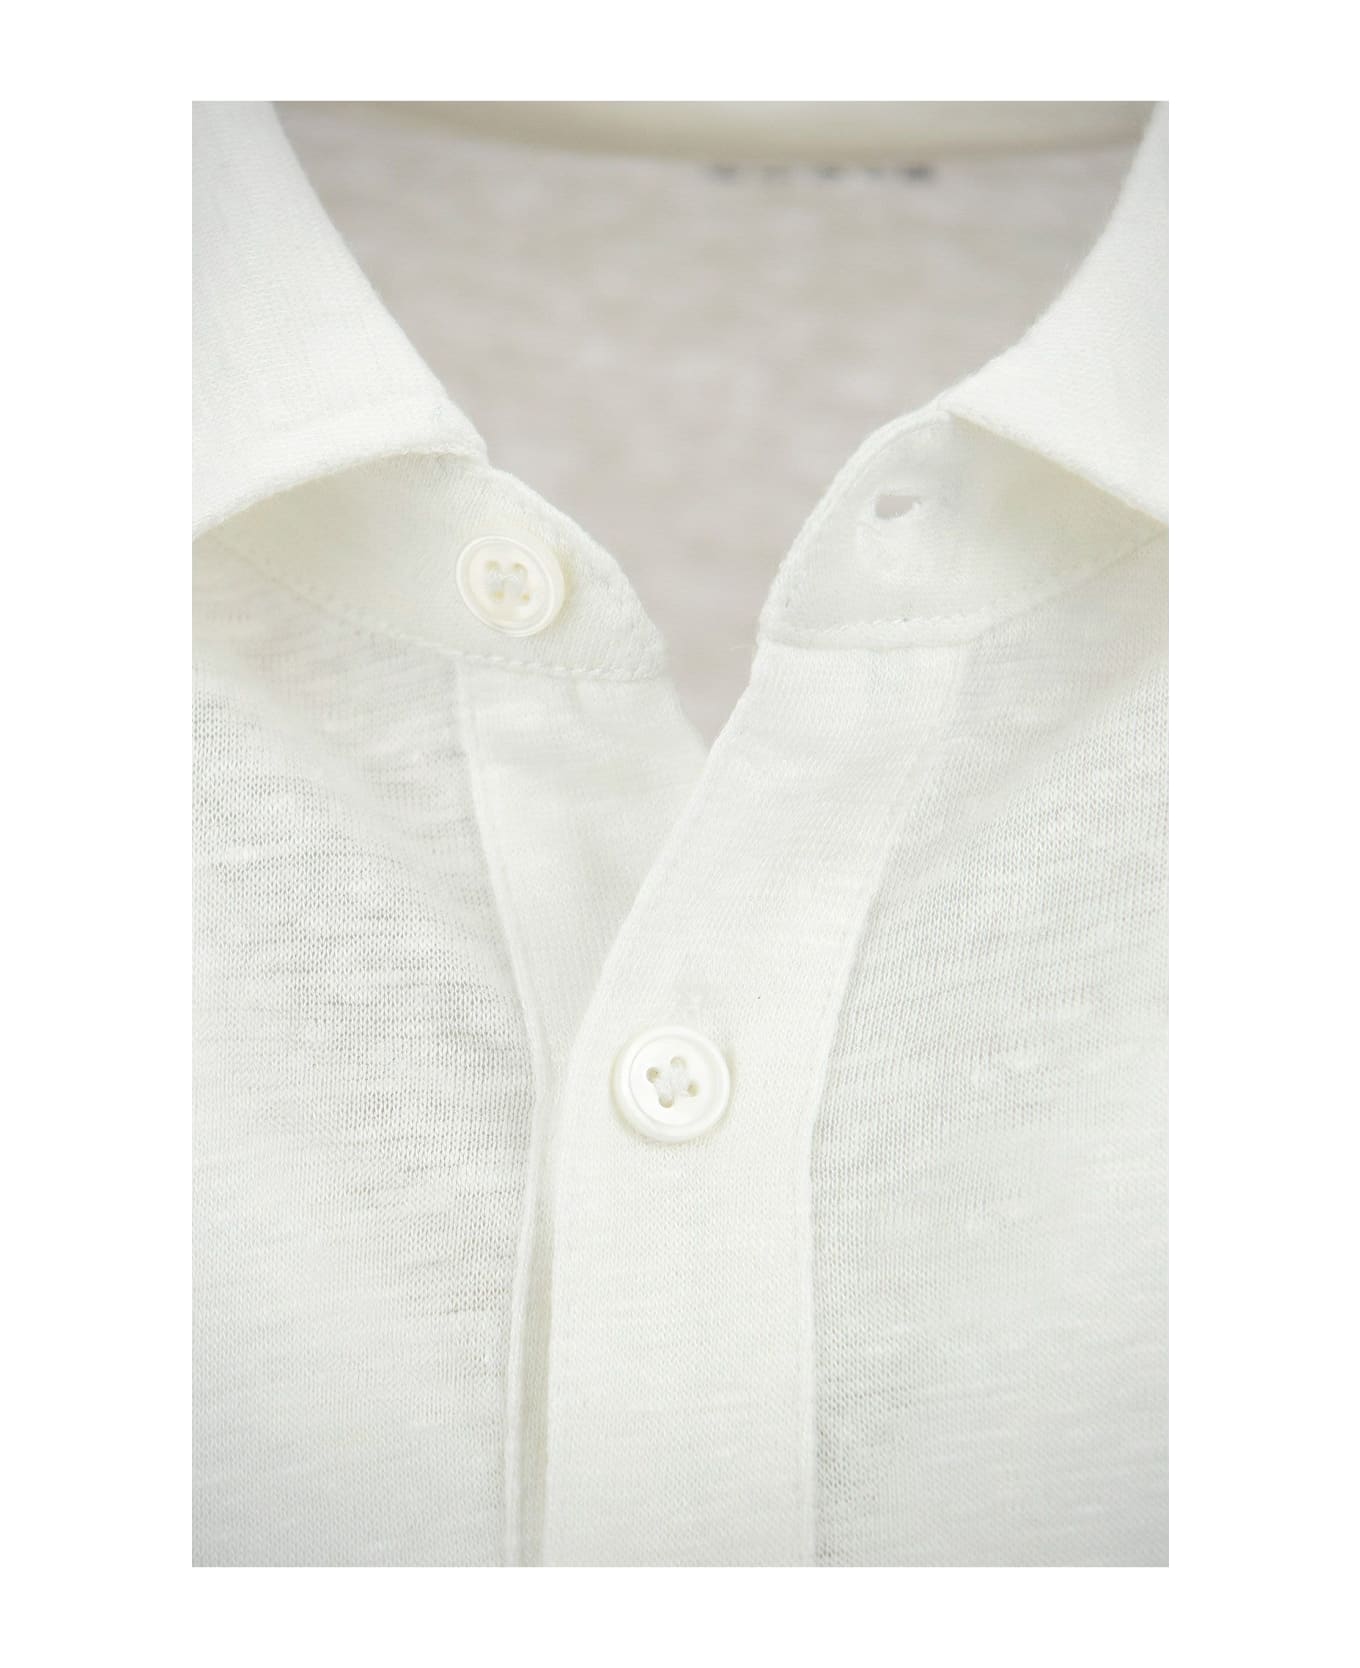 Majestic Filatures Linen Polo Shirt With Short Sleeves - White